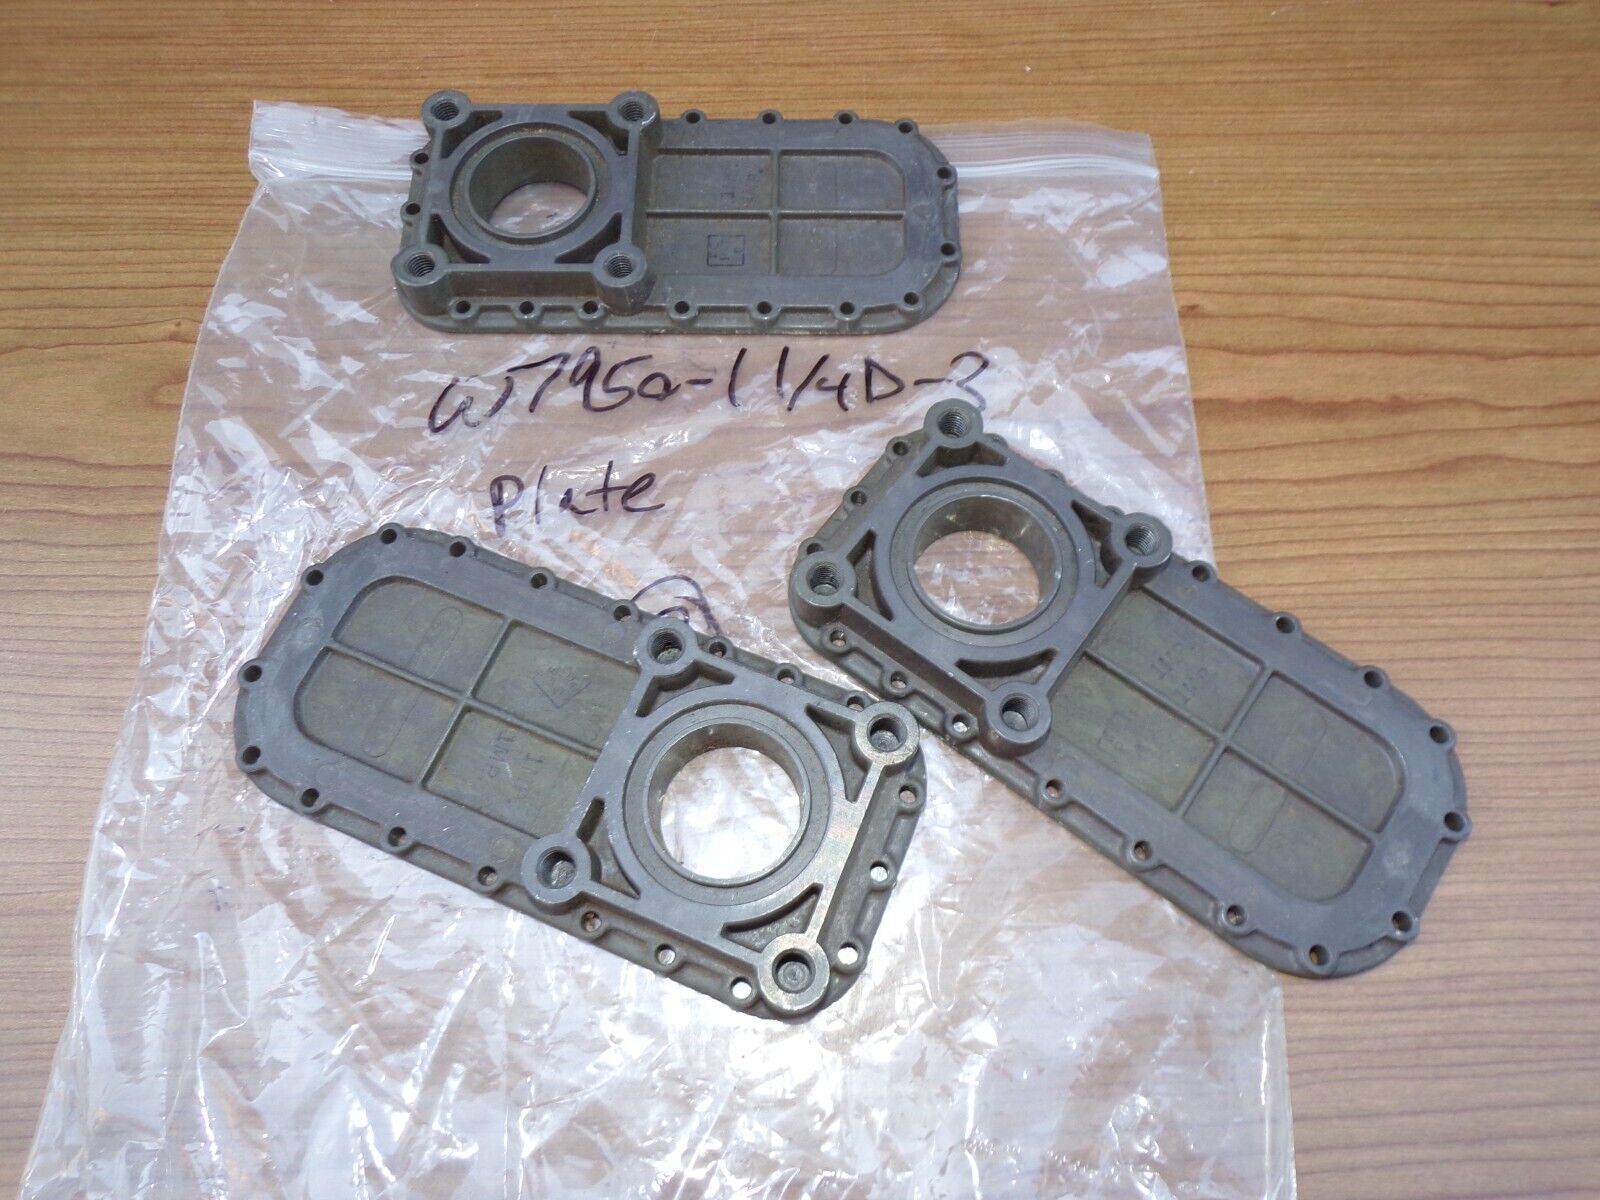 Whittaker Controls Covers W7950-1-1/4D3